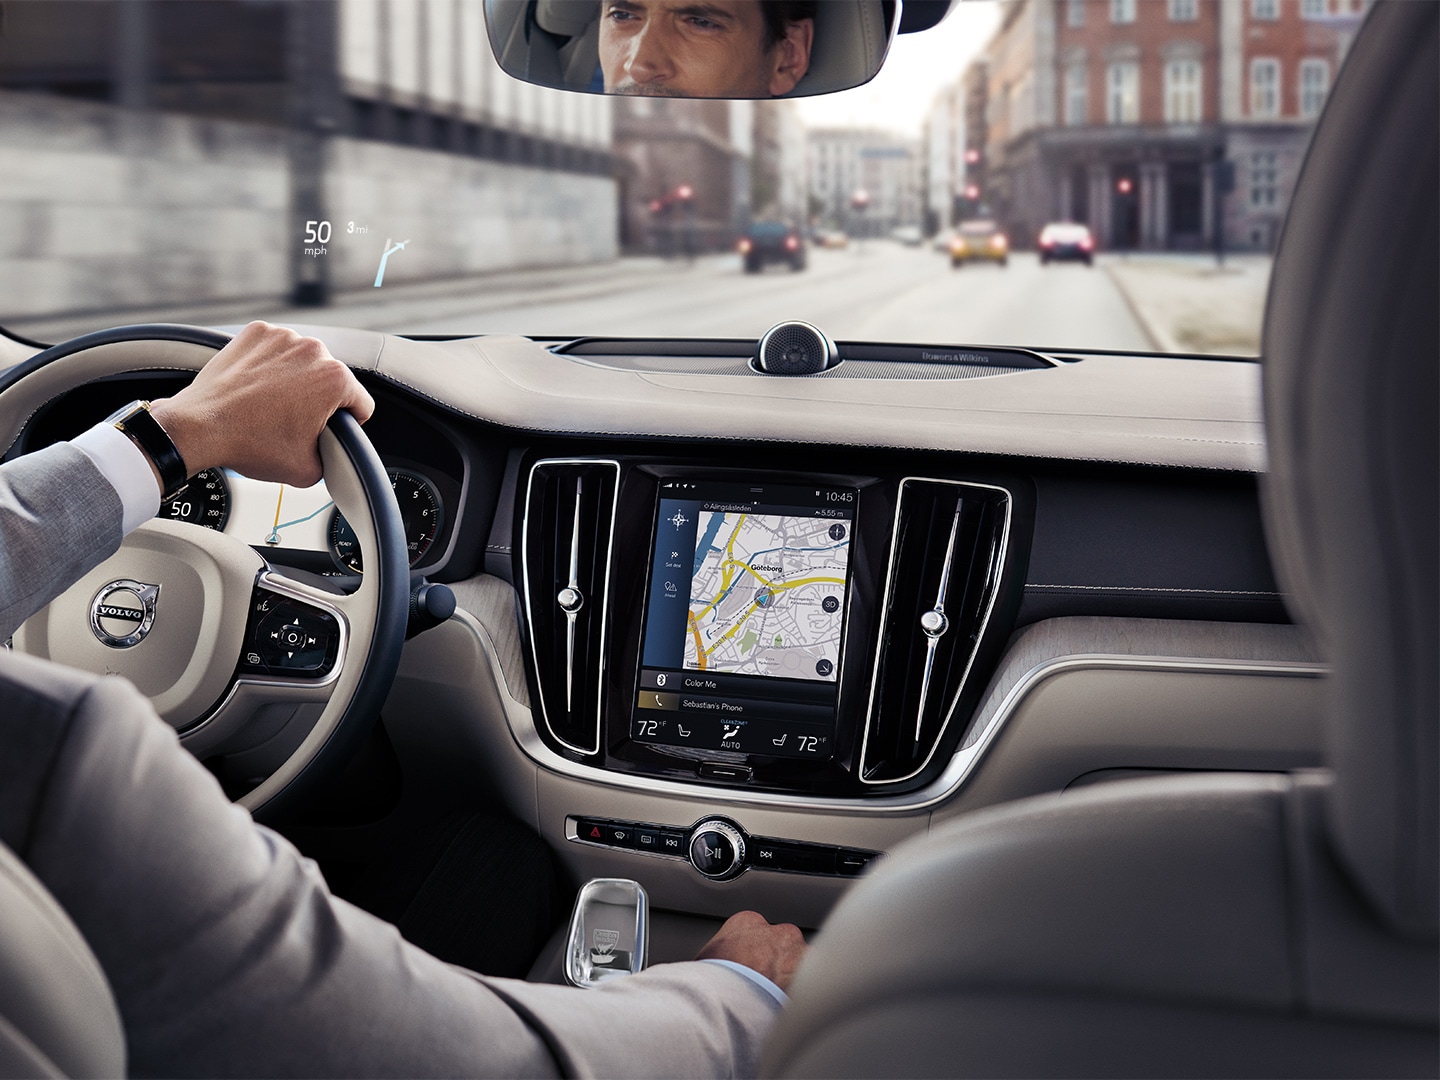 Inside a Volvo Sedan, a man driving on the road with help of navigation system